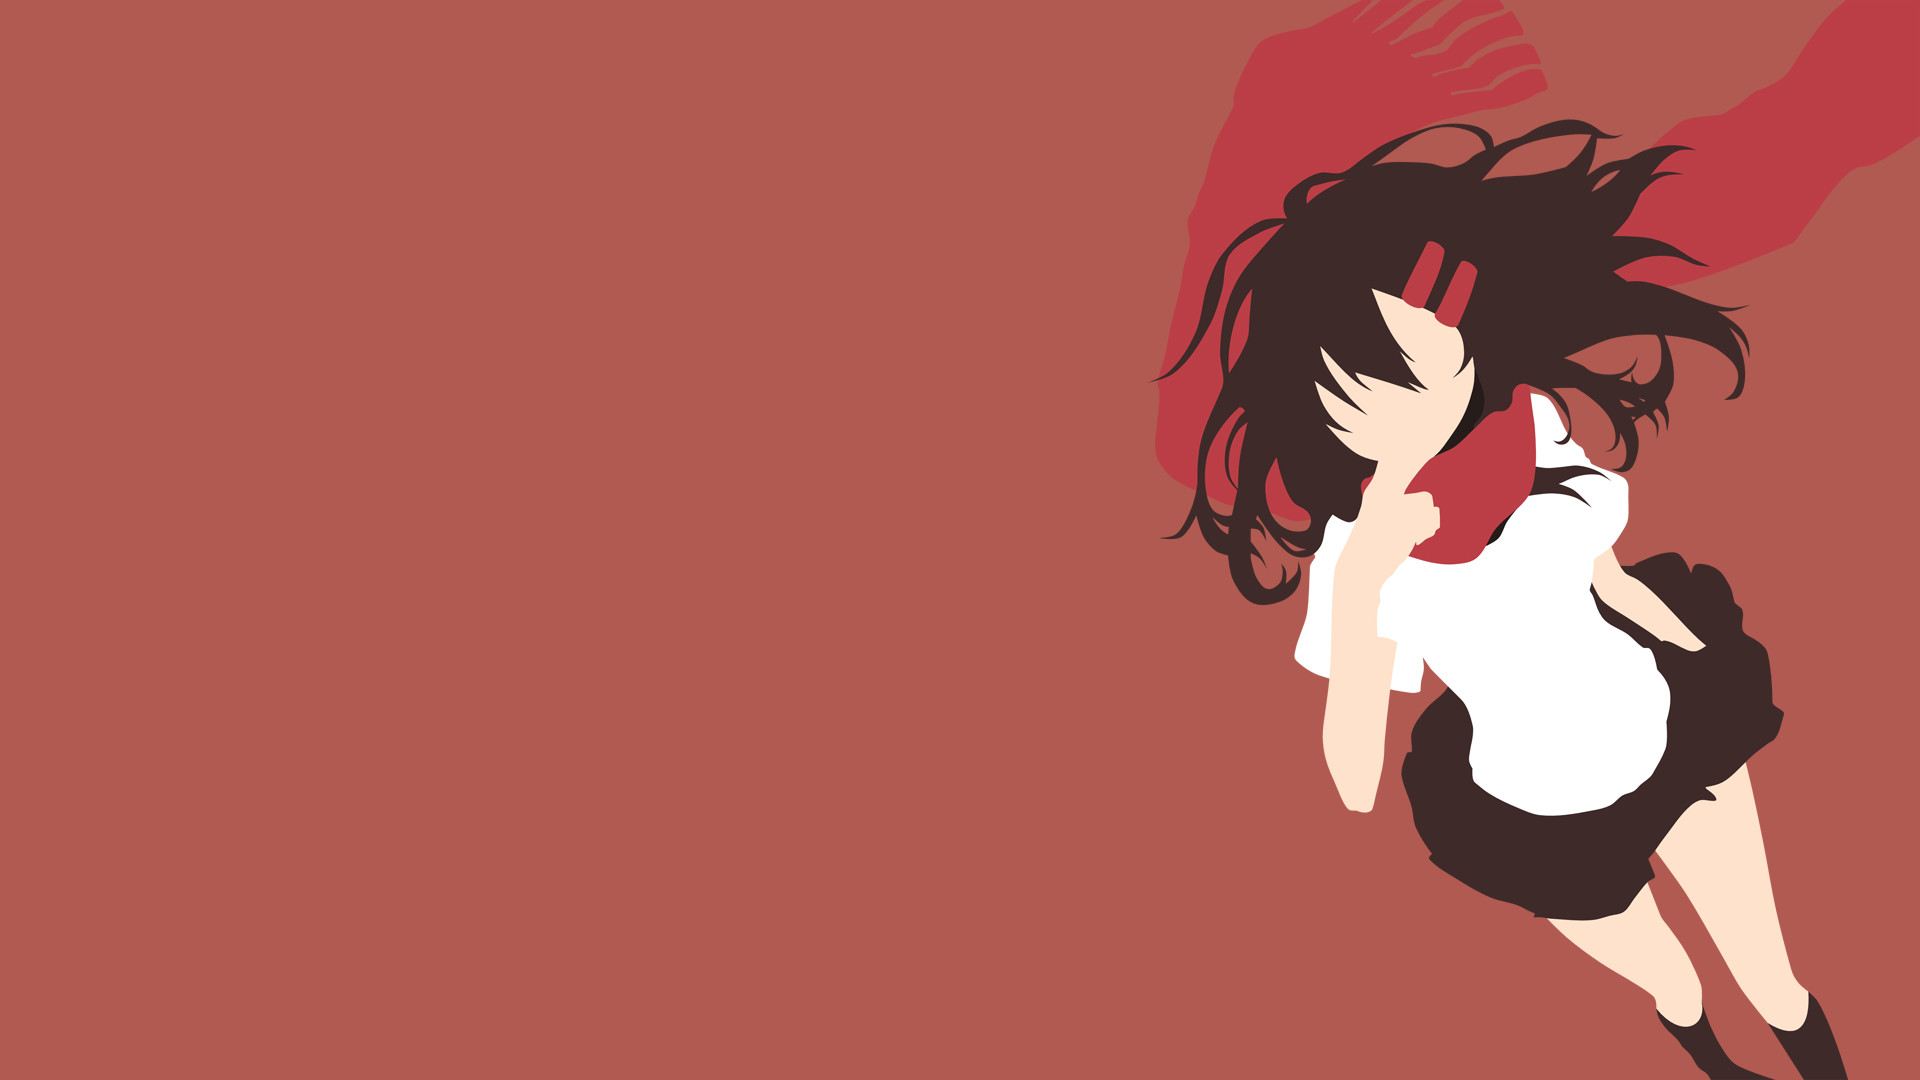 1920x1080 The Strength [Minimalist] by Rendracula on DeviantArt | Minimalist |  Pinterest | Minimalist, Kagerou project and deviantART